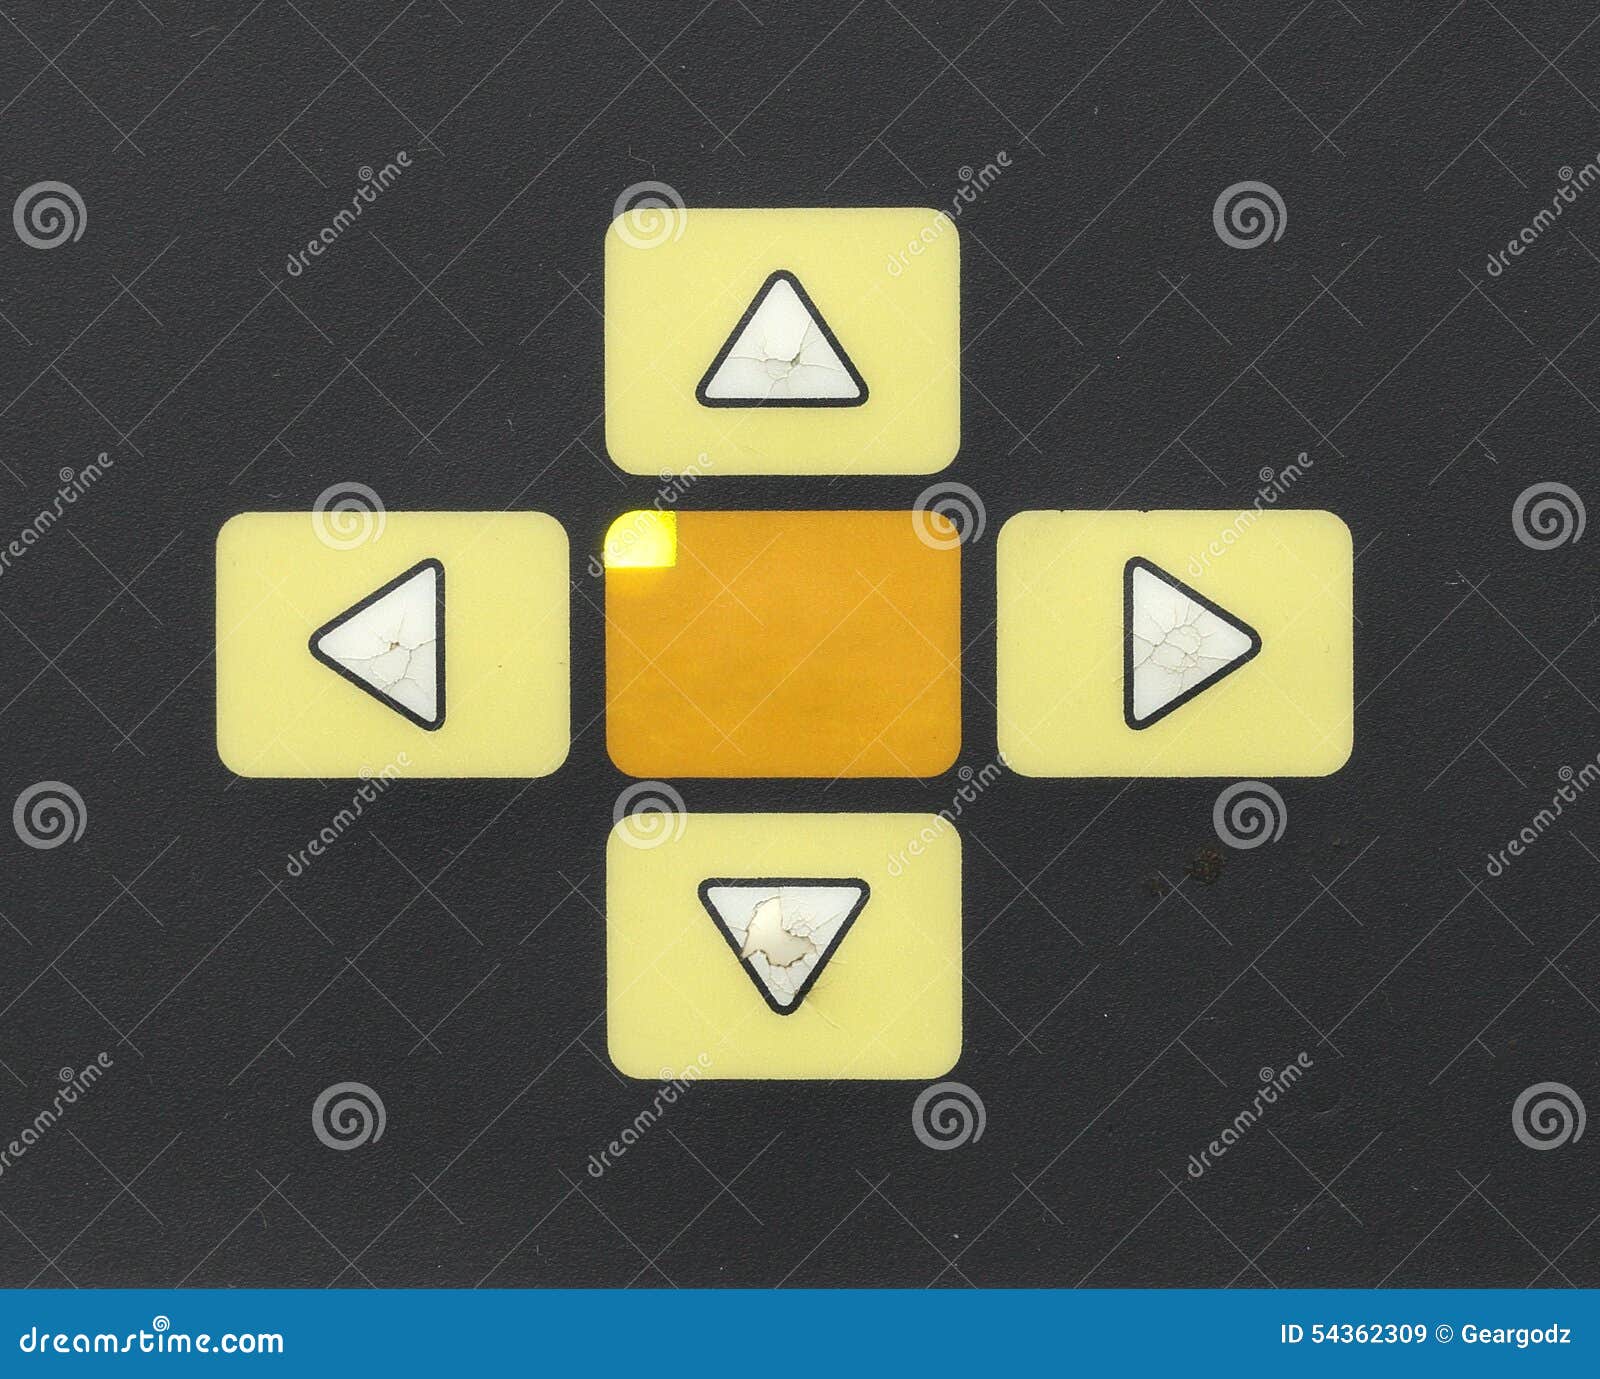 Control Buttons Up Down Right Left Stock Image Image Of Arrows